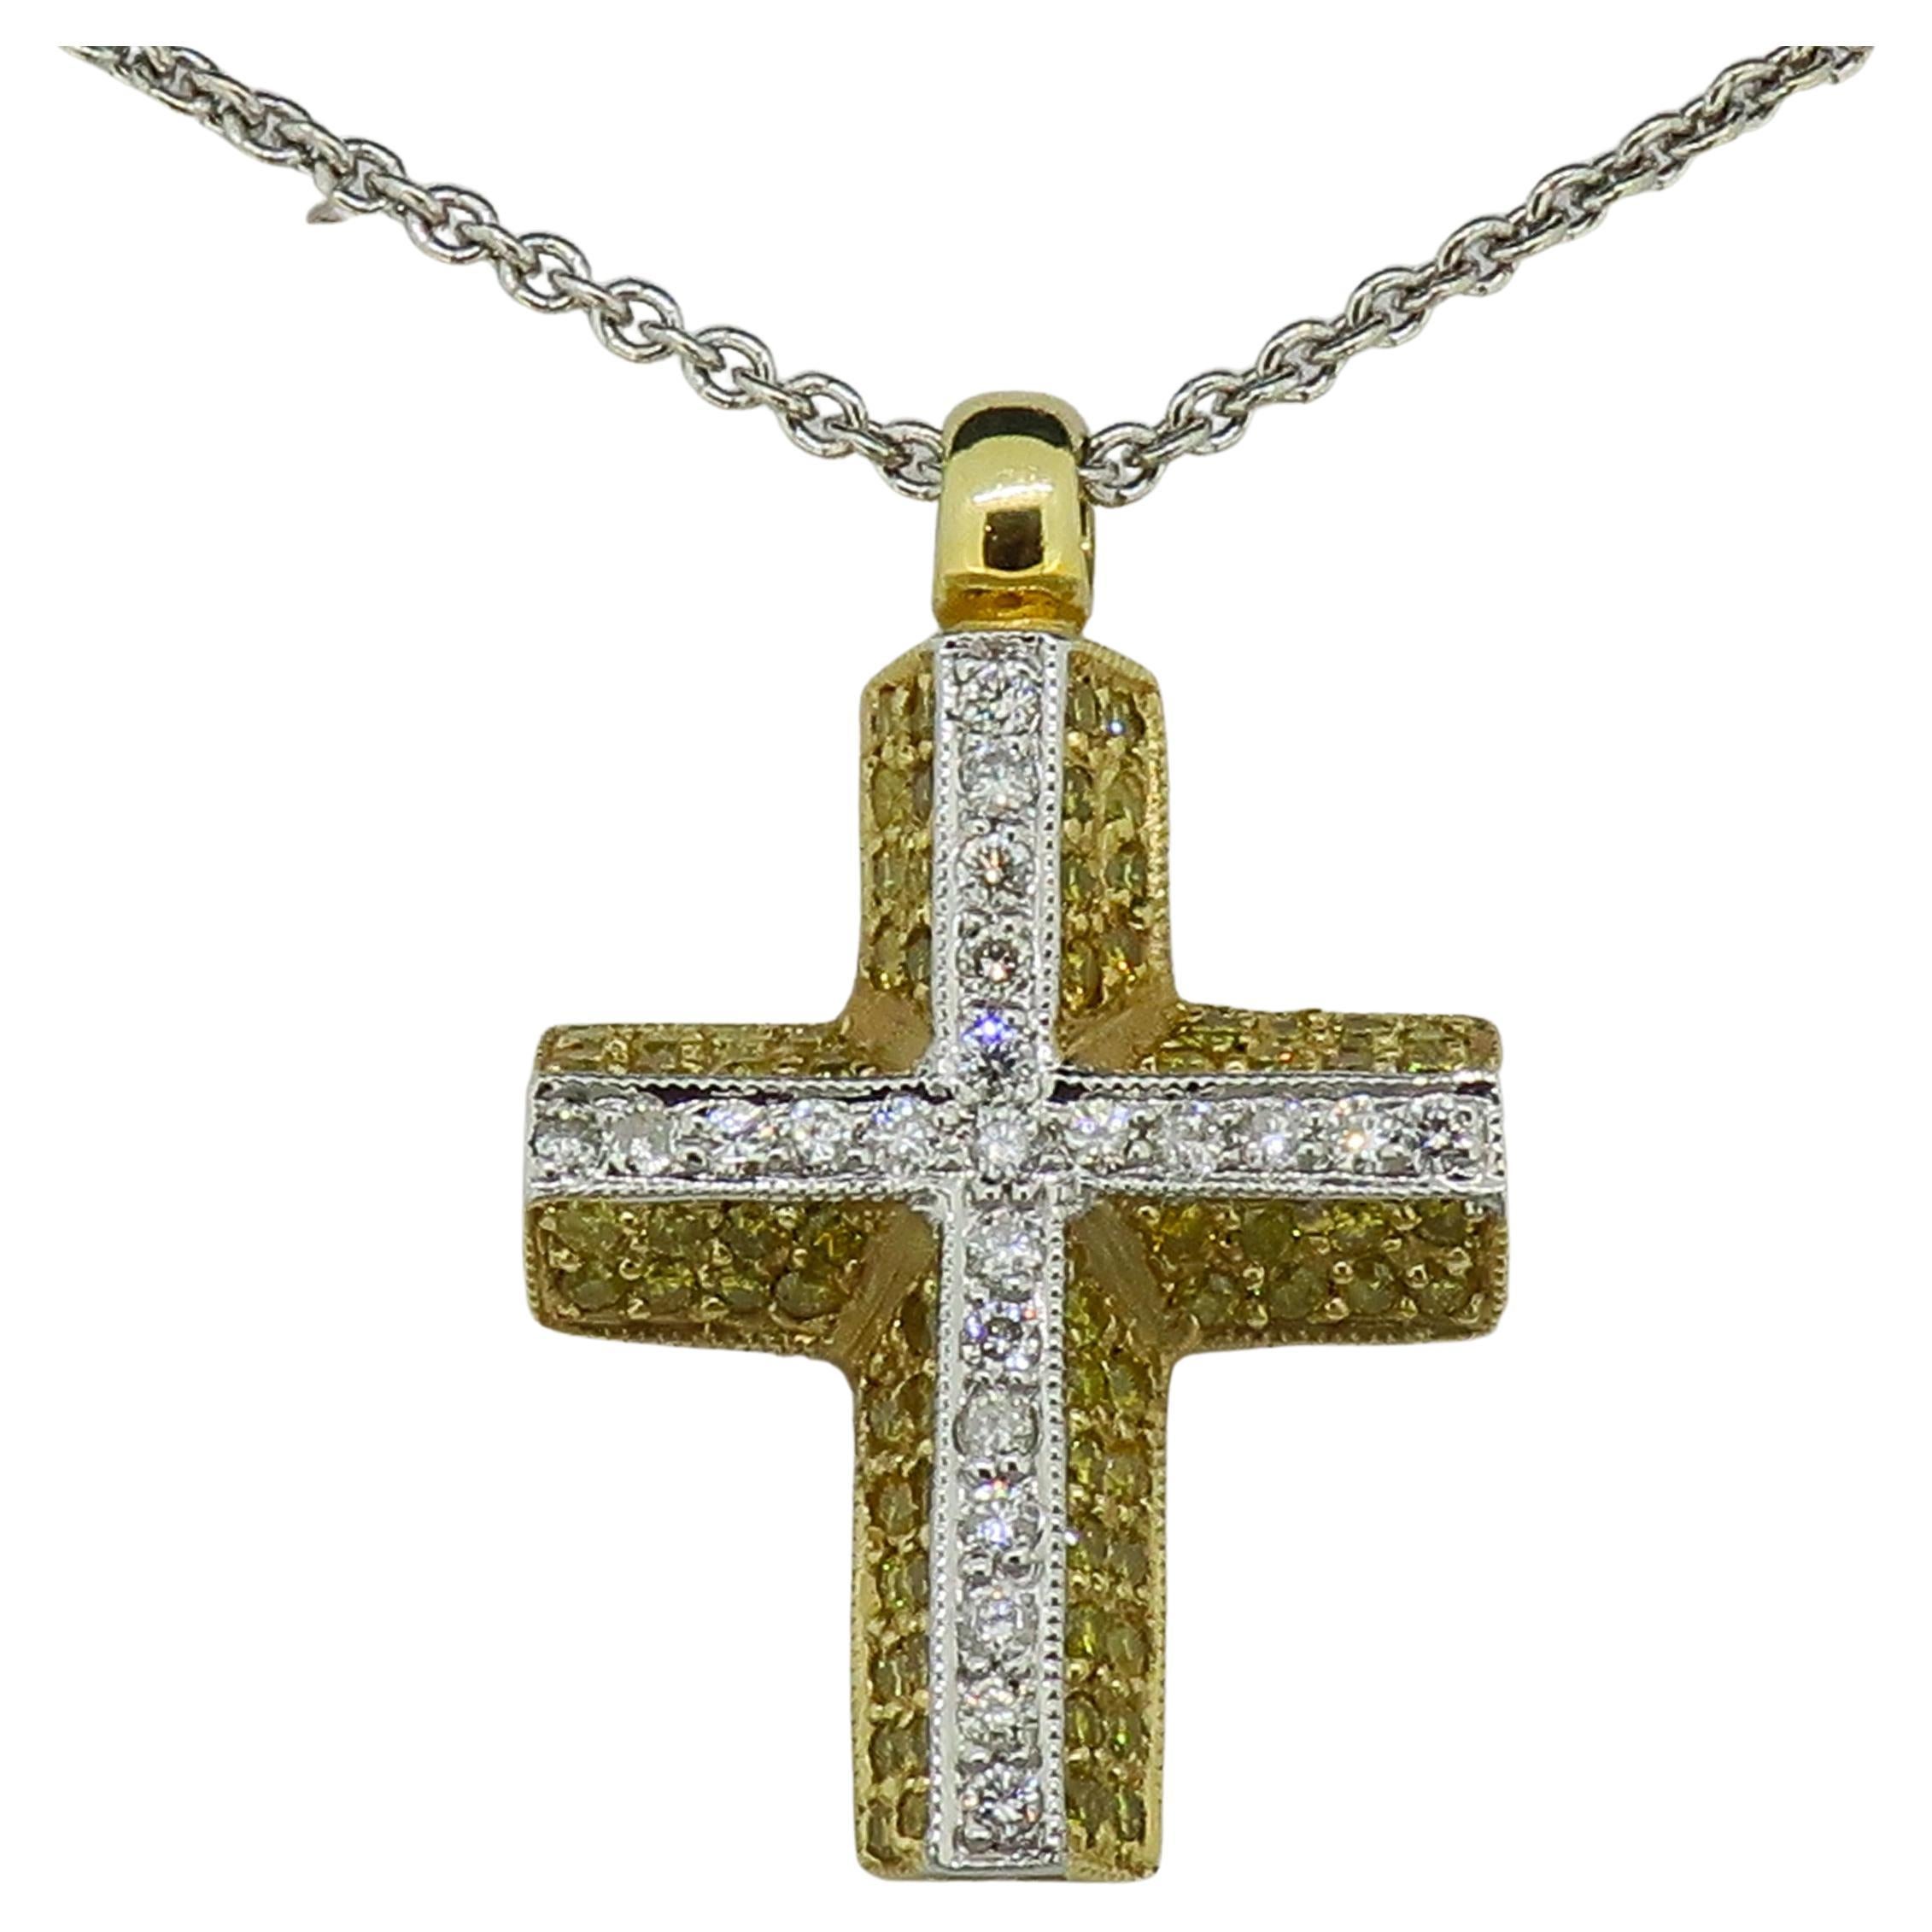 Yellow and White Diamond Cross Pendant 18 Karat Yellow and White Gold

Gorgeous diamond cross. Consisting of small yellow and white brilliant cut diamonds pave set all over the cross. One raised row of white brilliant cut diamonds in 18ct white gold